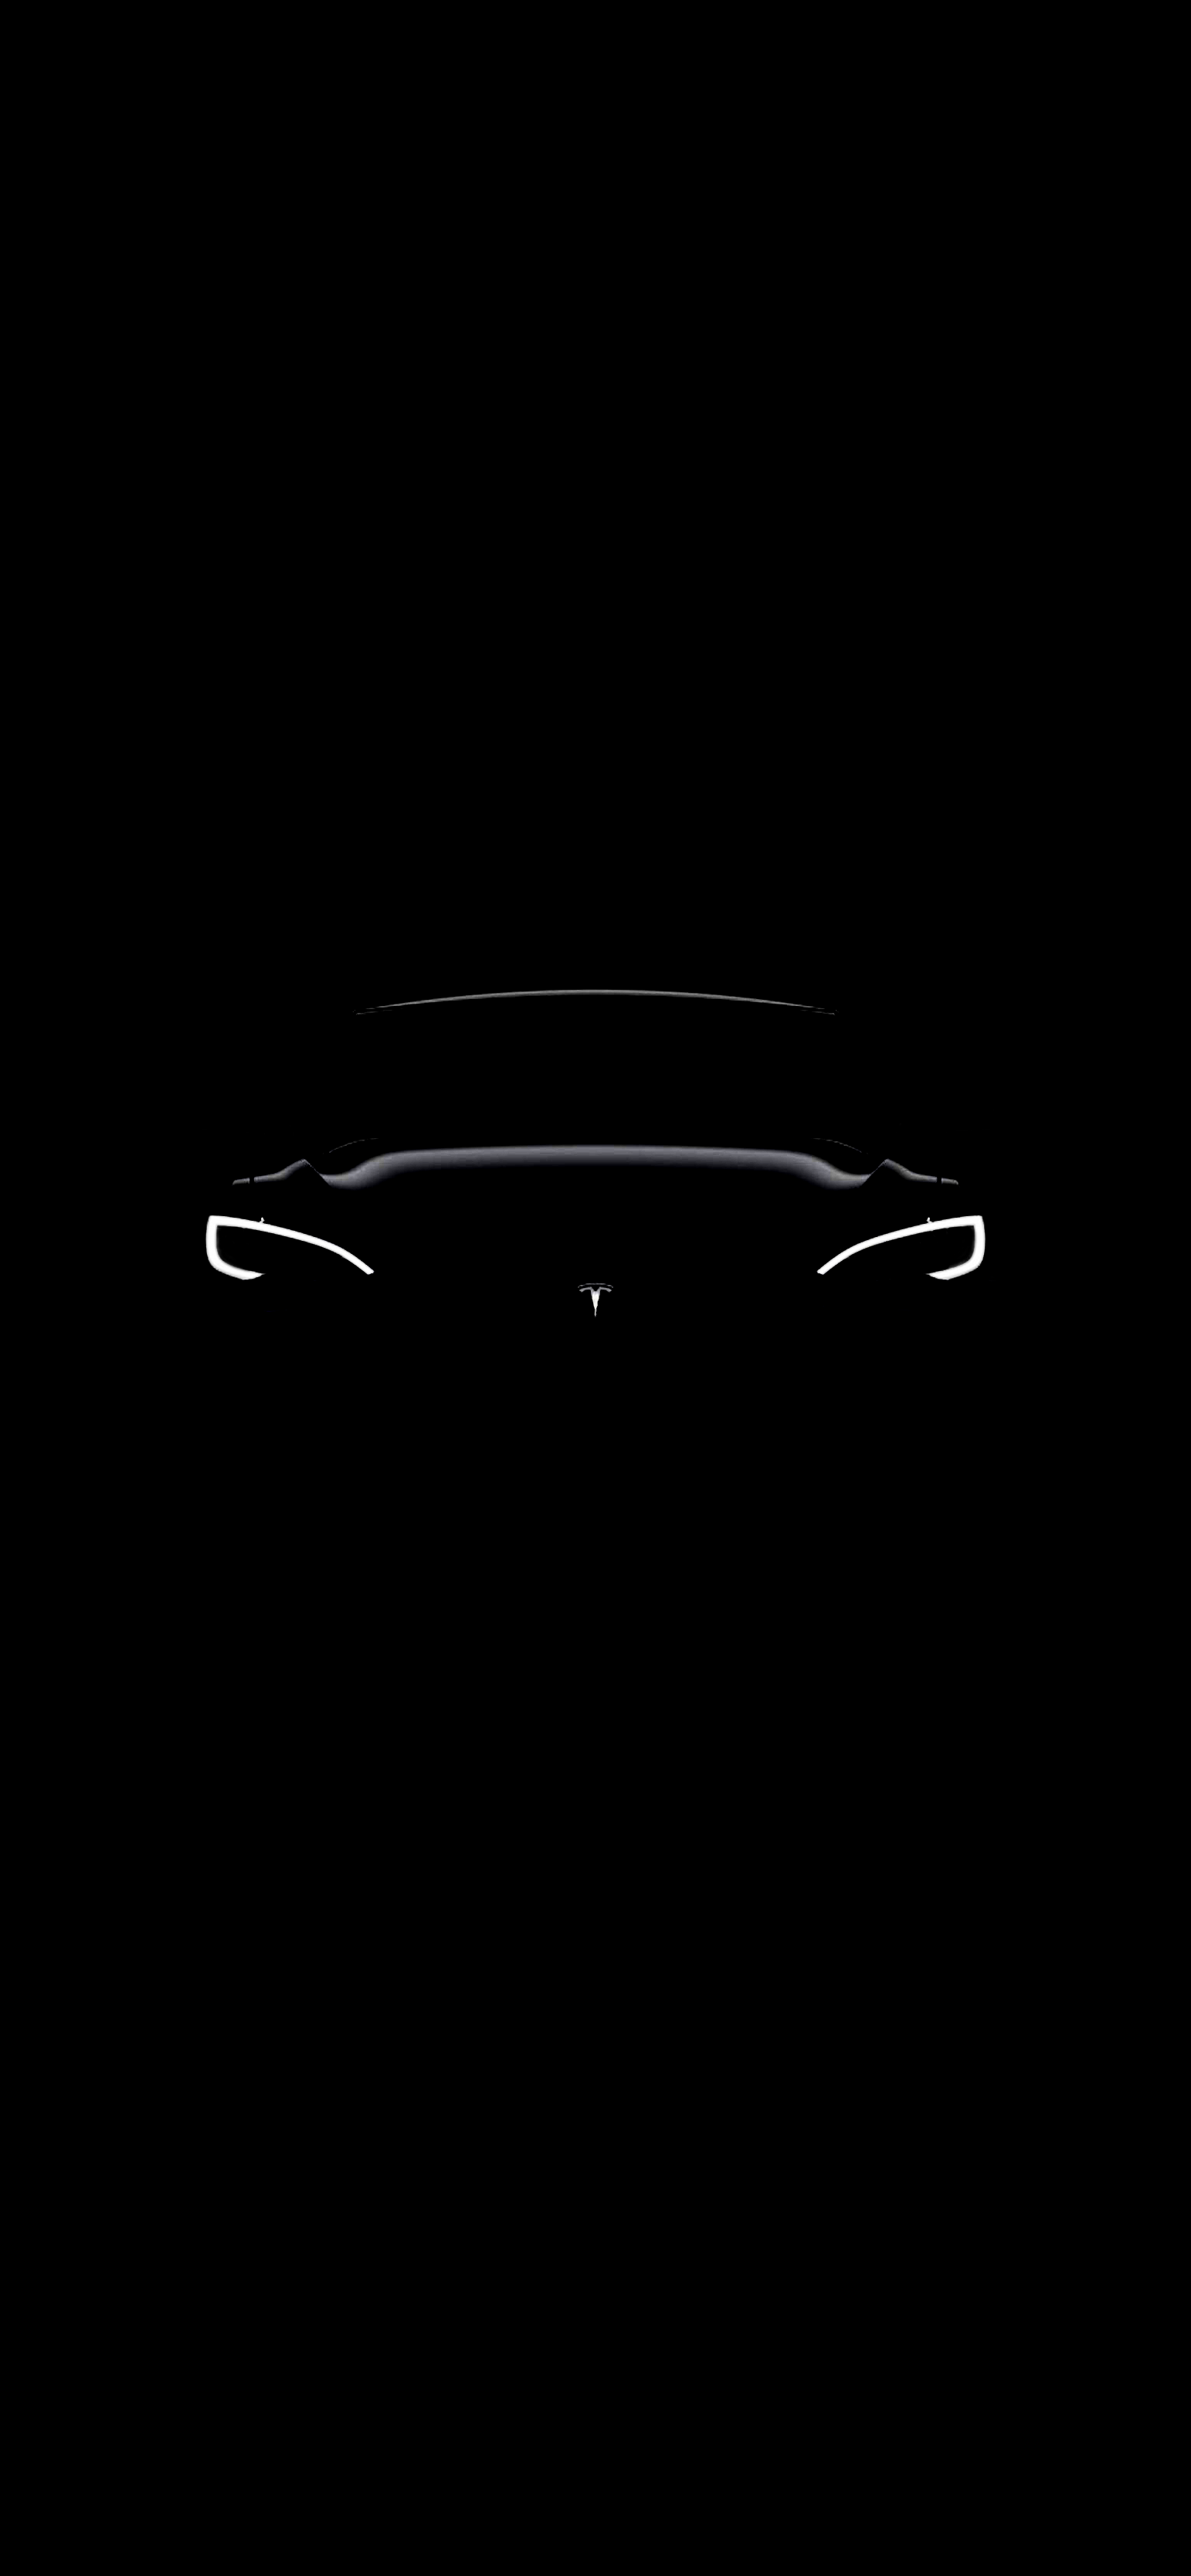 Made a Tesla S wallpaper for my iPhone 12 Pro